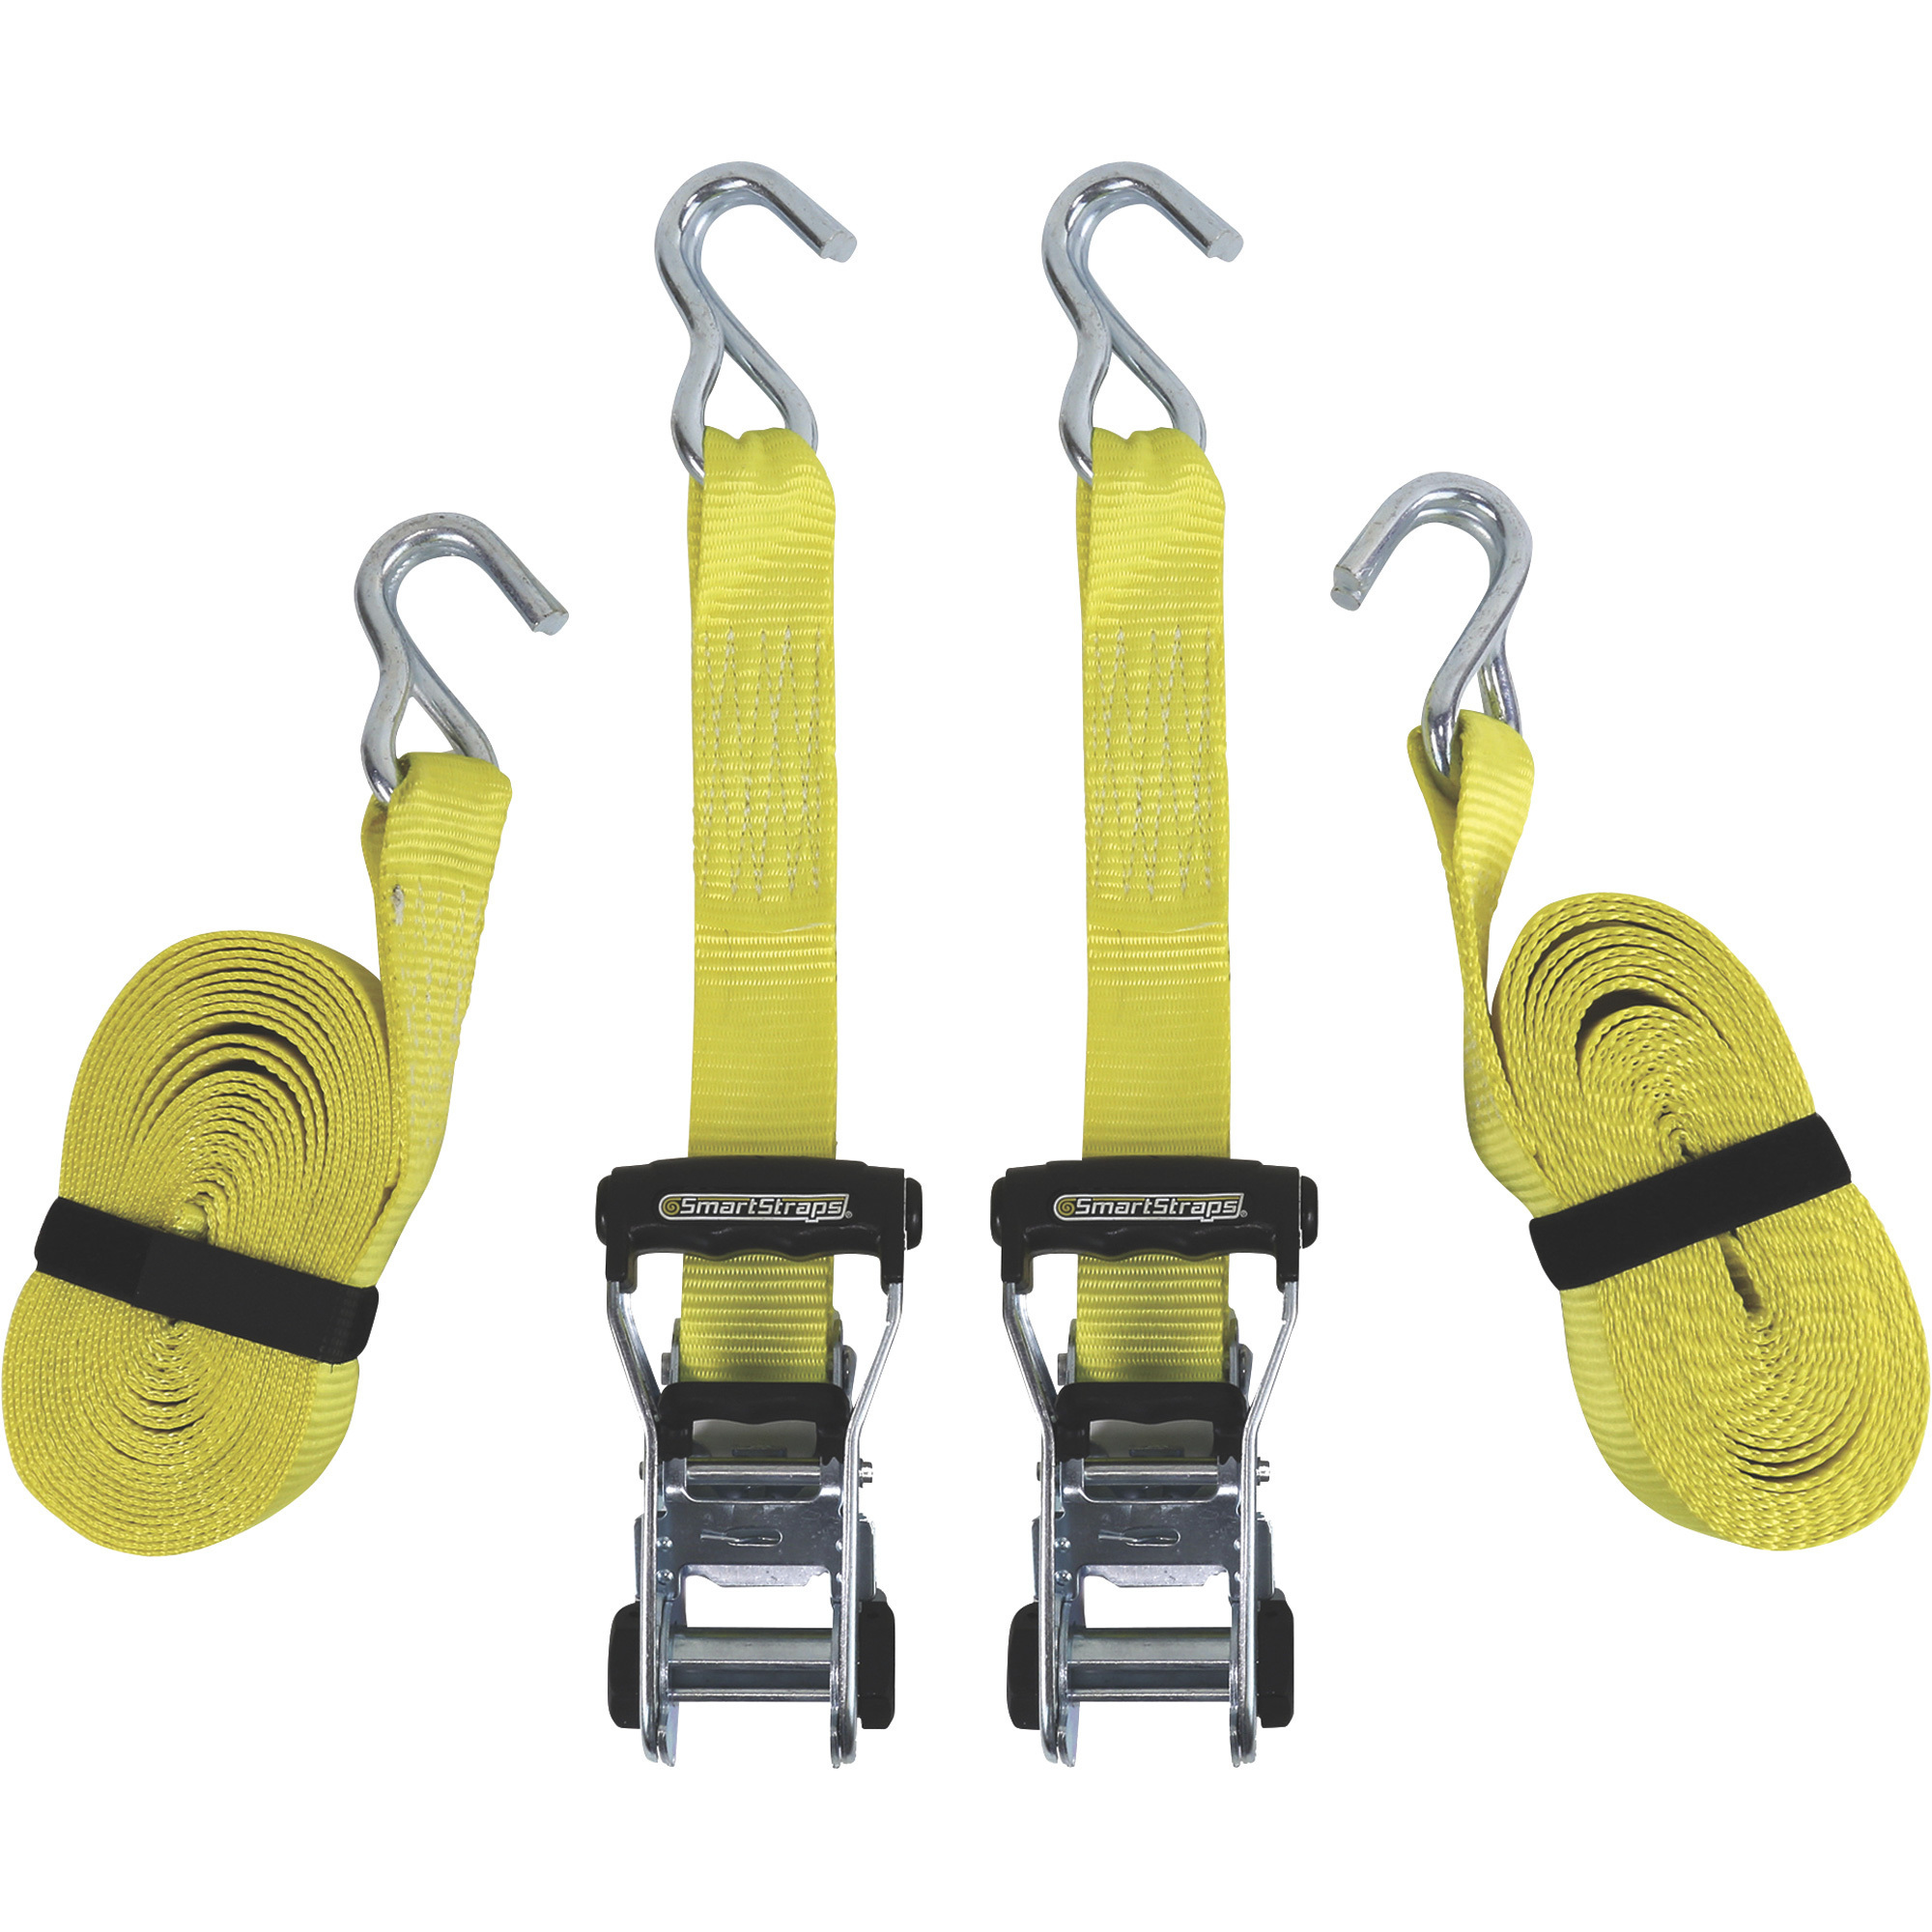 SmartStraps RatchetX Ratchet Tie-Down Strap, 2-Pack, 1.5 Inch x 20ft., with J-Hook, 5000-Lb. Breaking Strength, Yellow, Model 4574